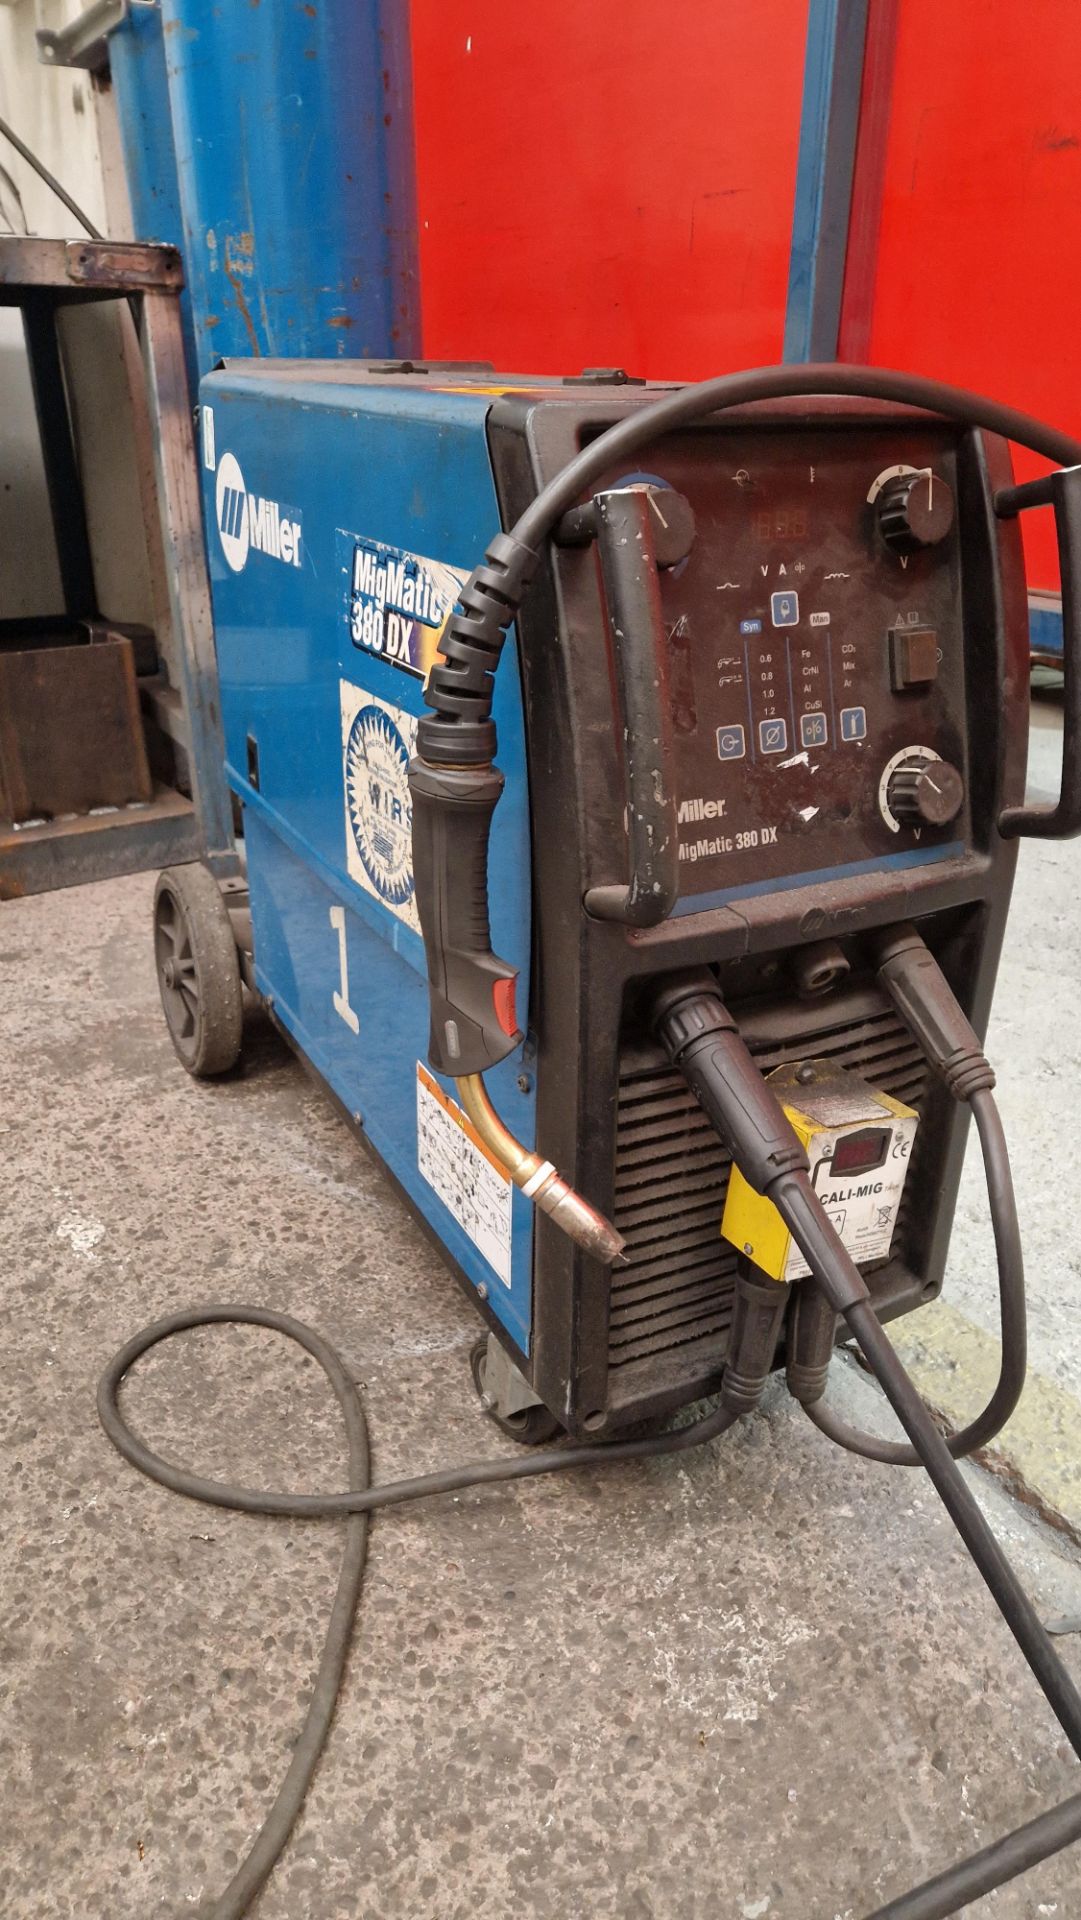 MILLER MIGMATIC 380 DX WELDING SET (NOTE: ASSETS LOCATED IN NEWCASTLE-UNDER-LYME, STAFFORDSHIRE &